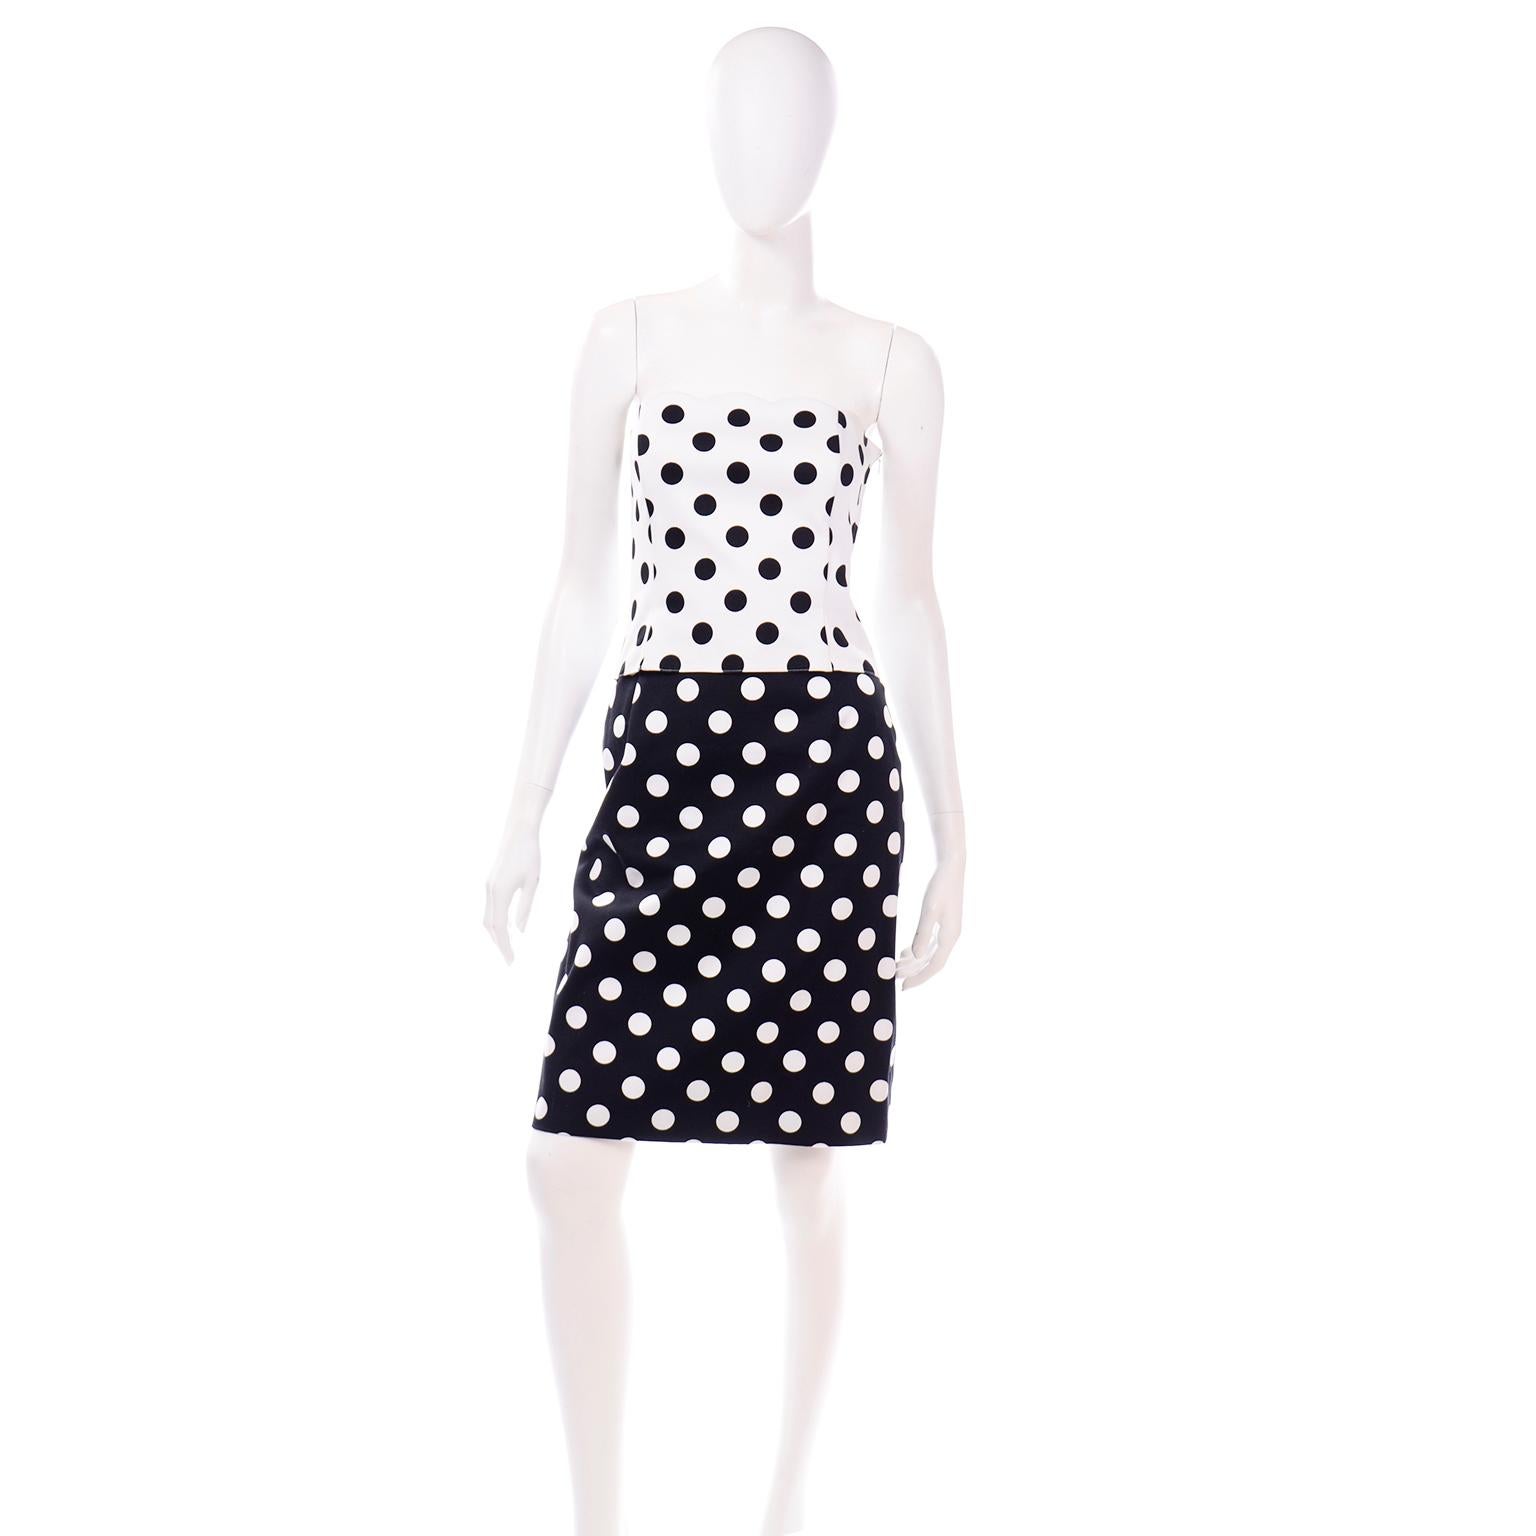 This is a fun Louis Feraud vintage 3 piece black and white polka dot 100% cotton suit with a skirt, bustier, and jacket. This ensemble would make a great dress alternative for that special daytime event. The bustier is white with black dots and the